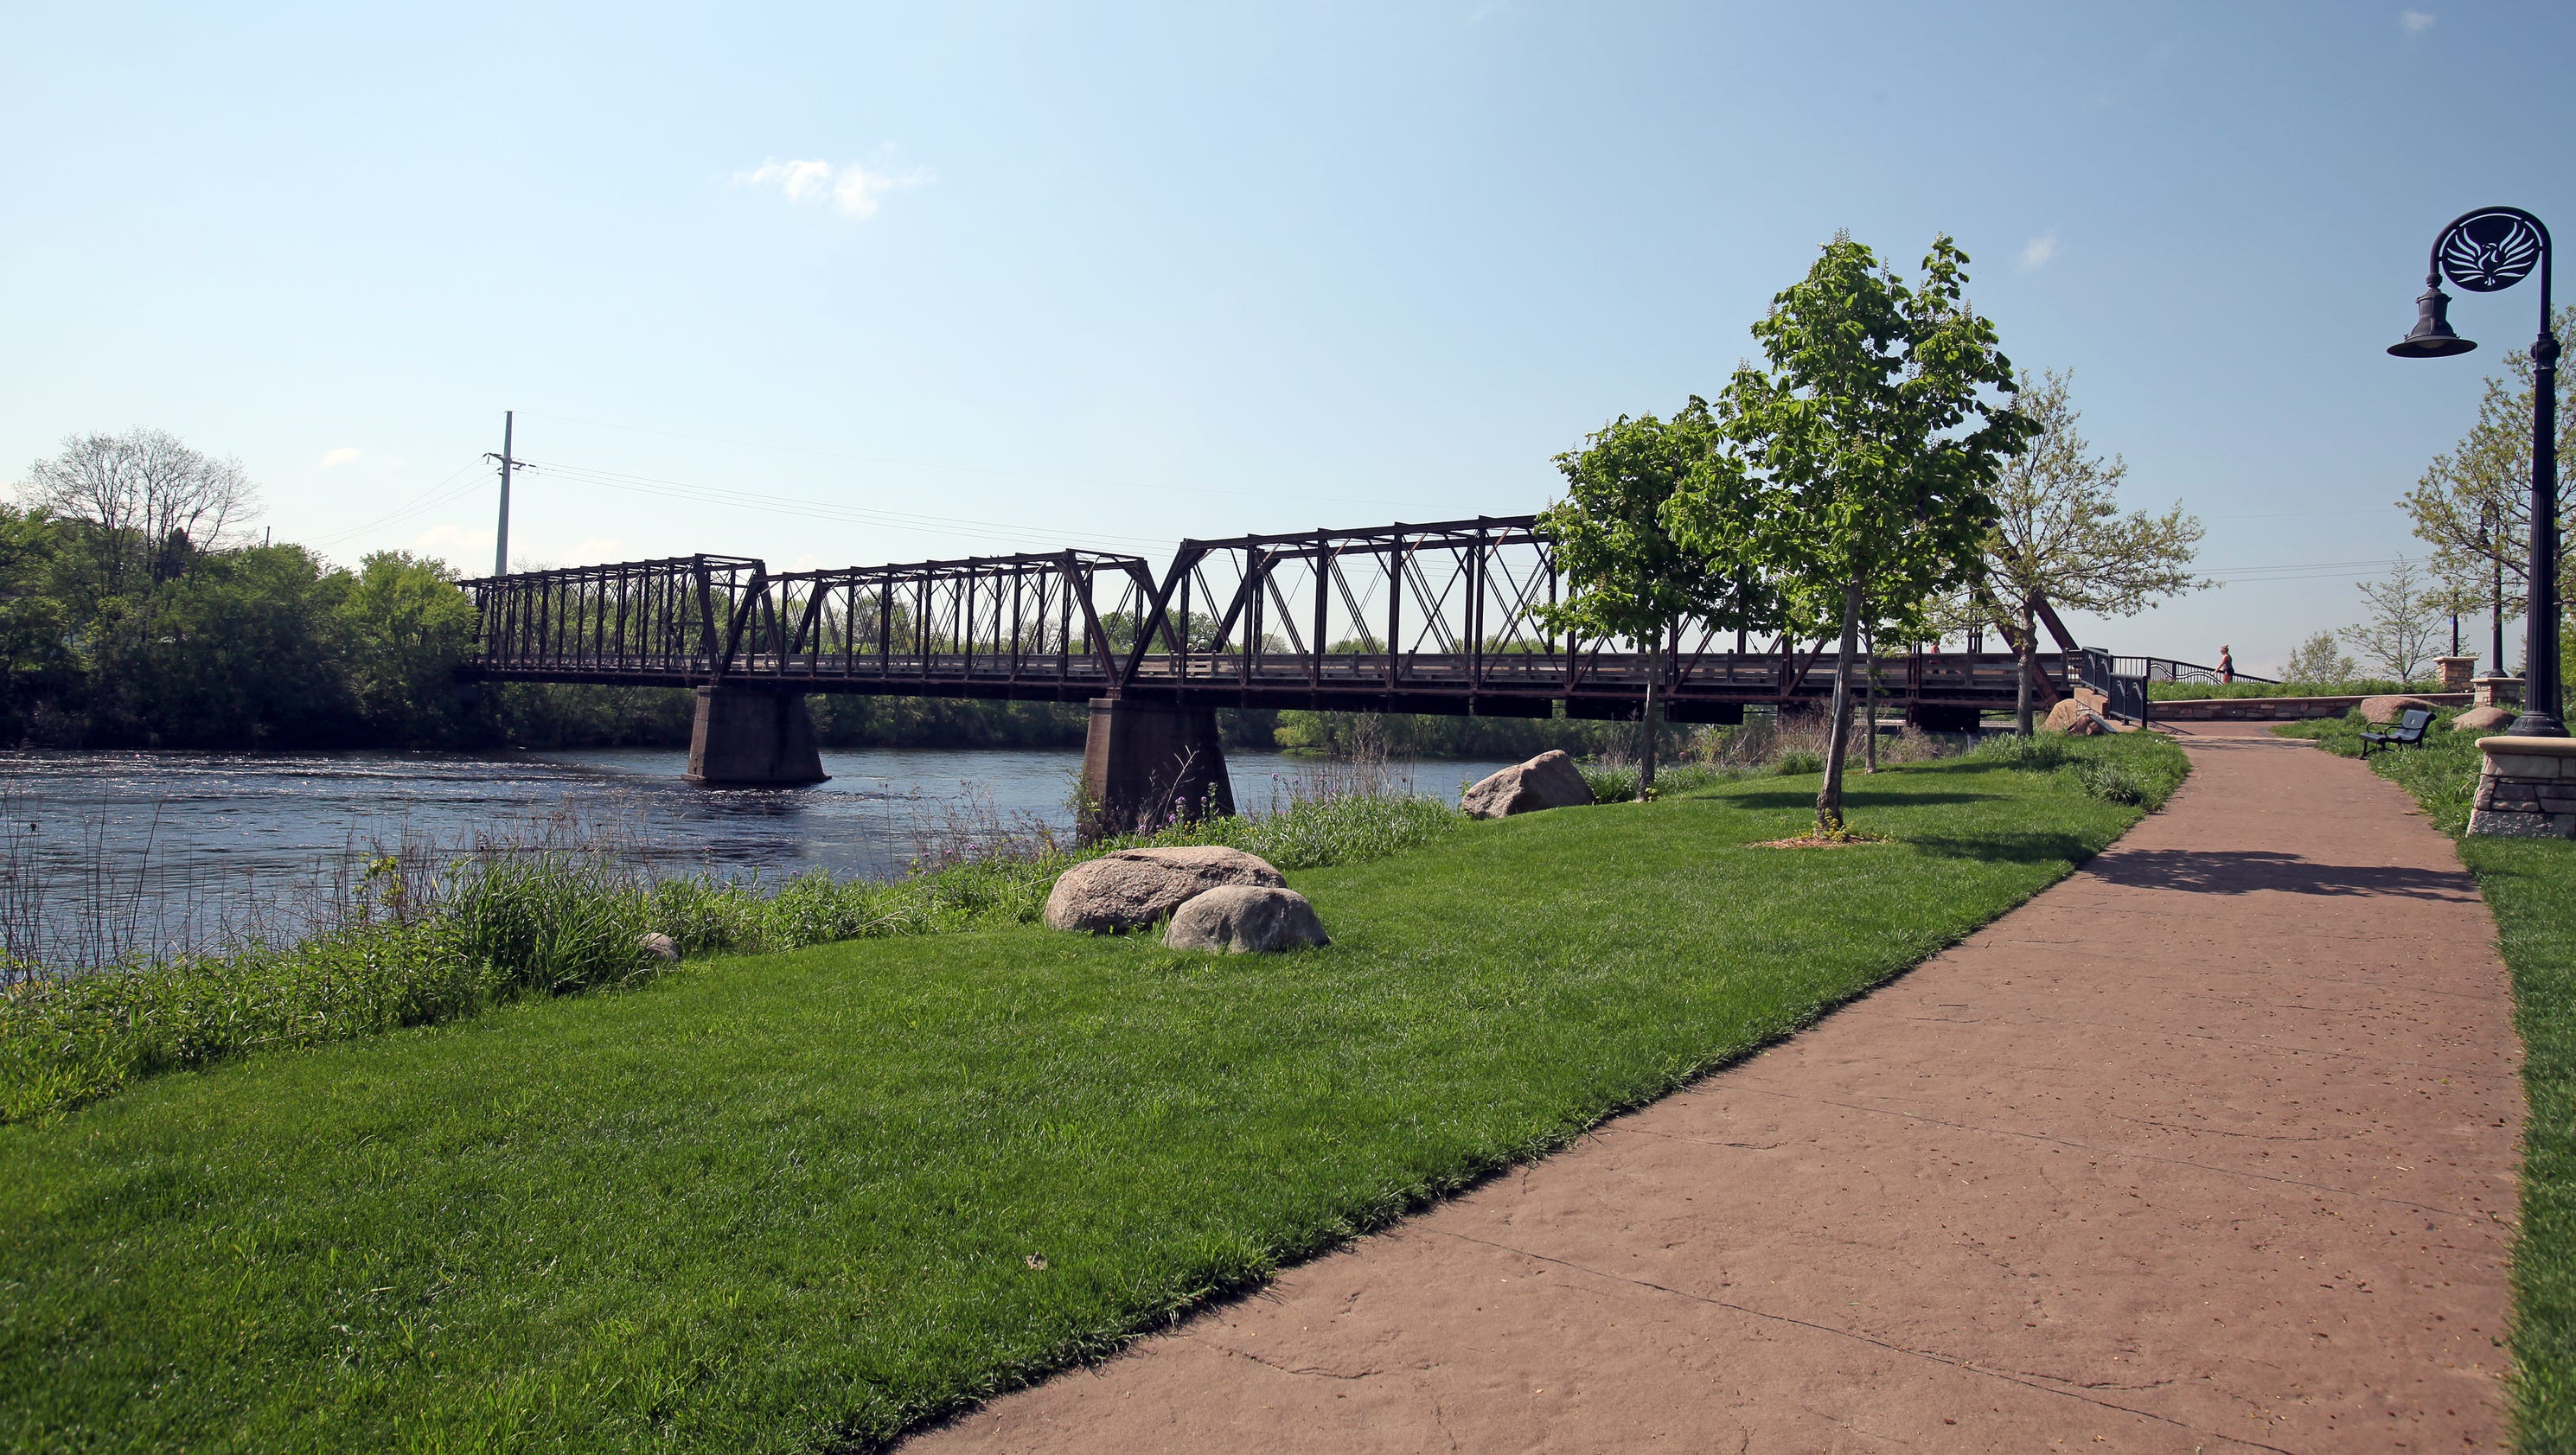 Trip Tips: Things to do in Eau Claire and Chippewa Falls